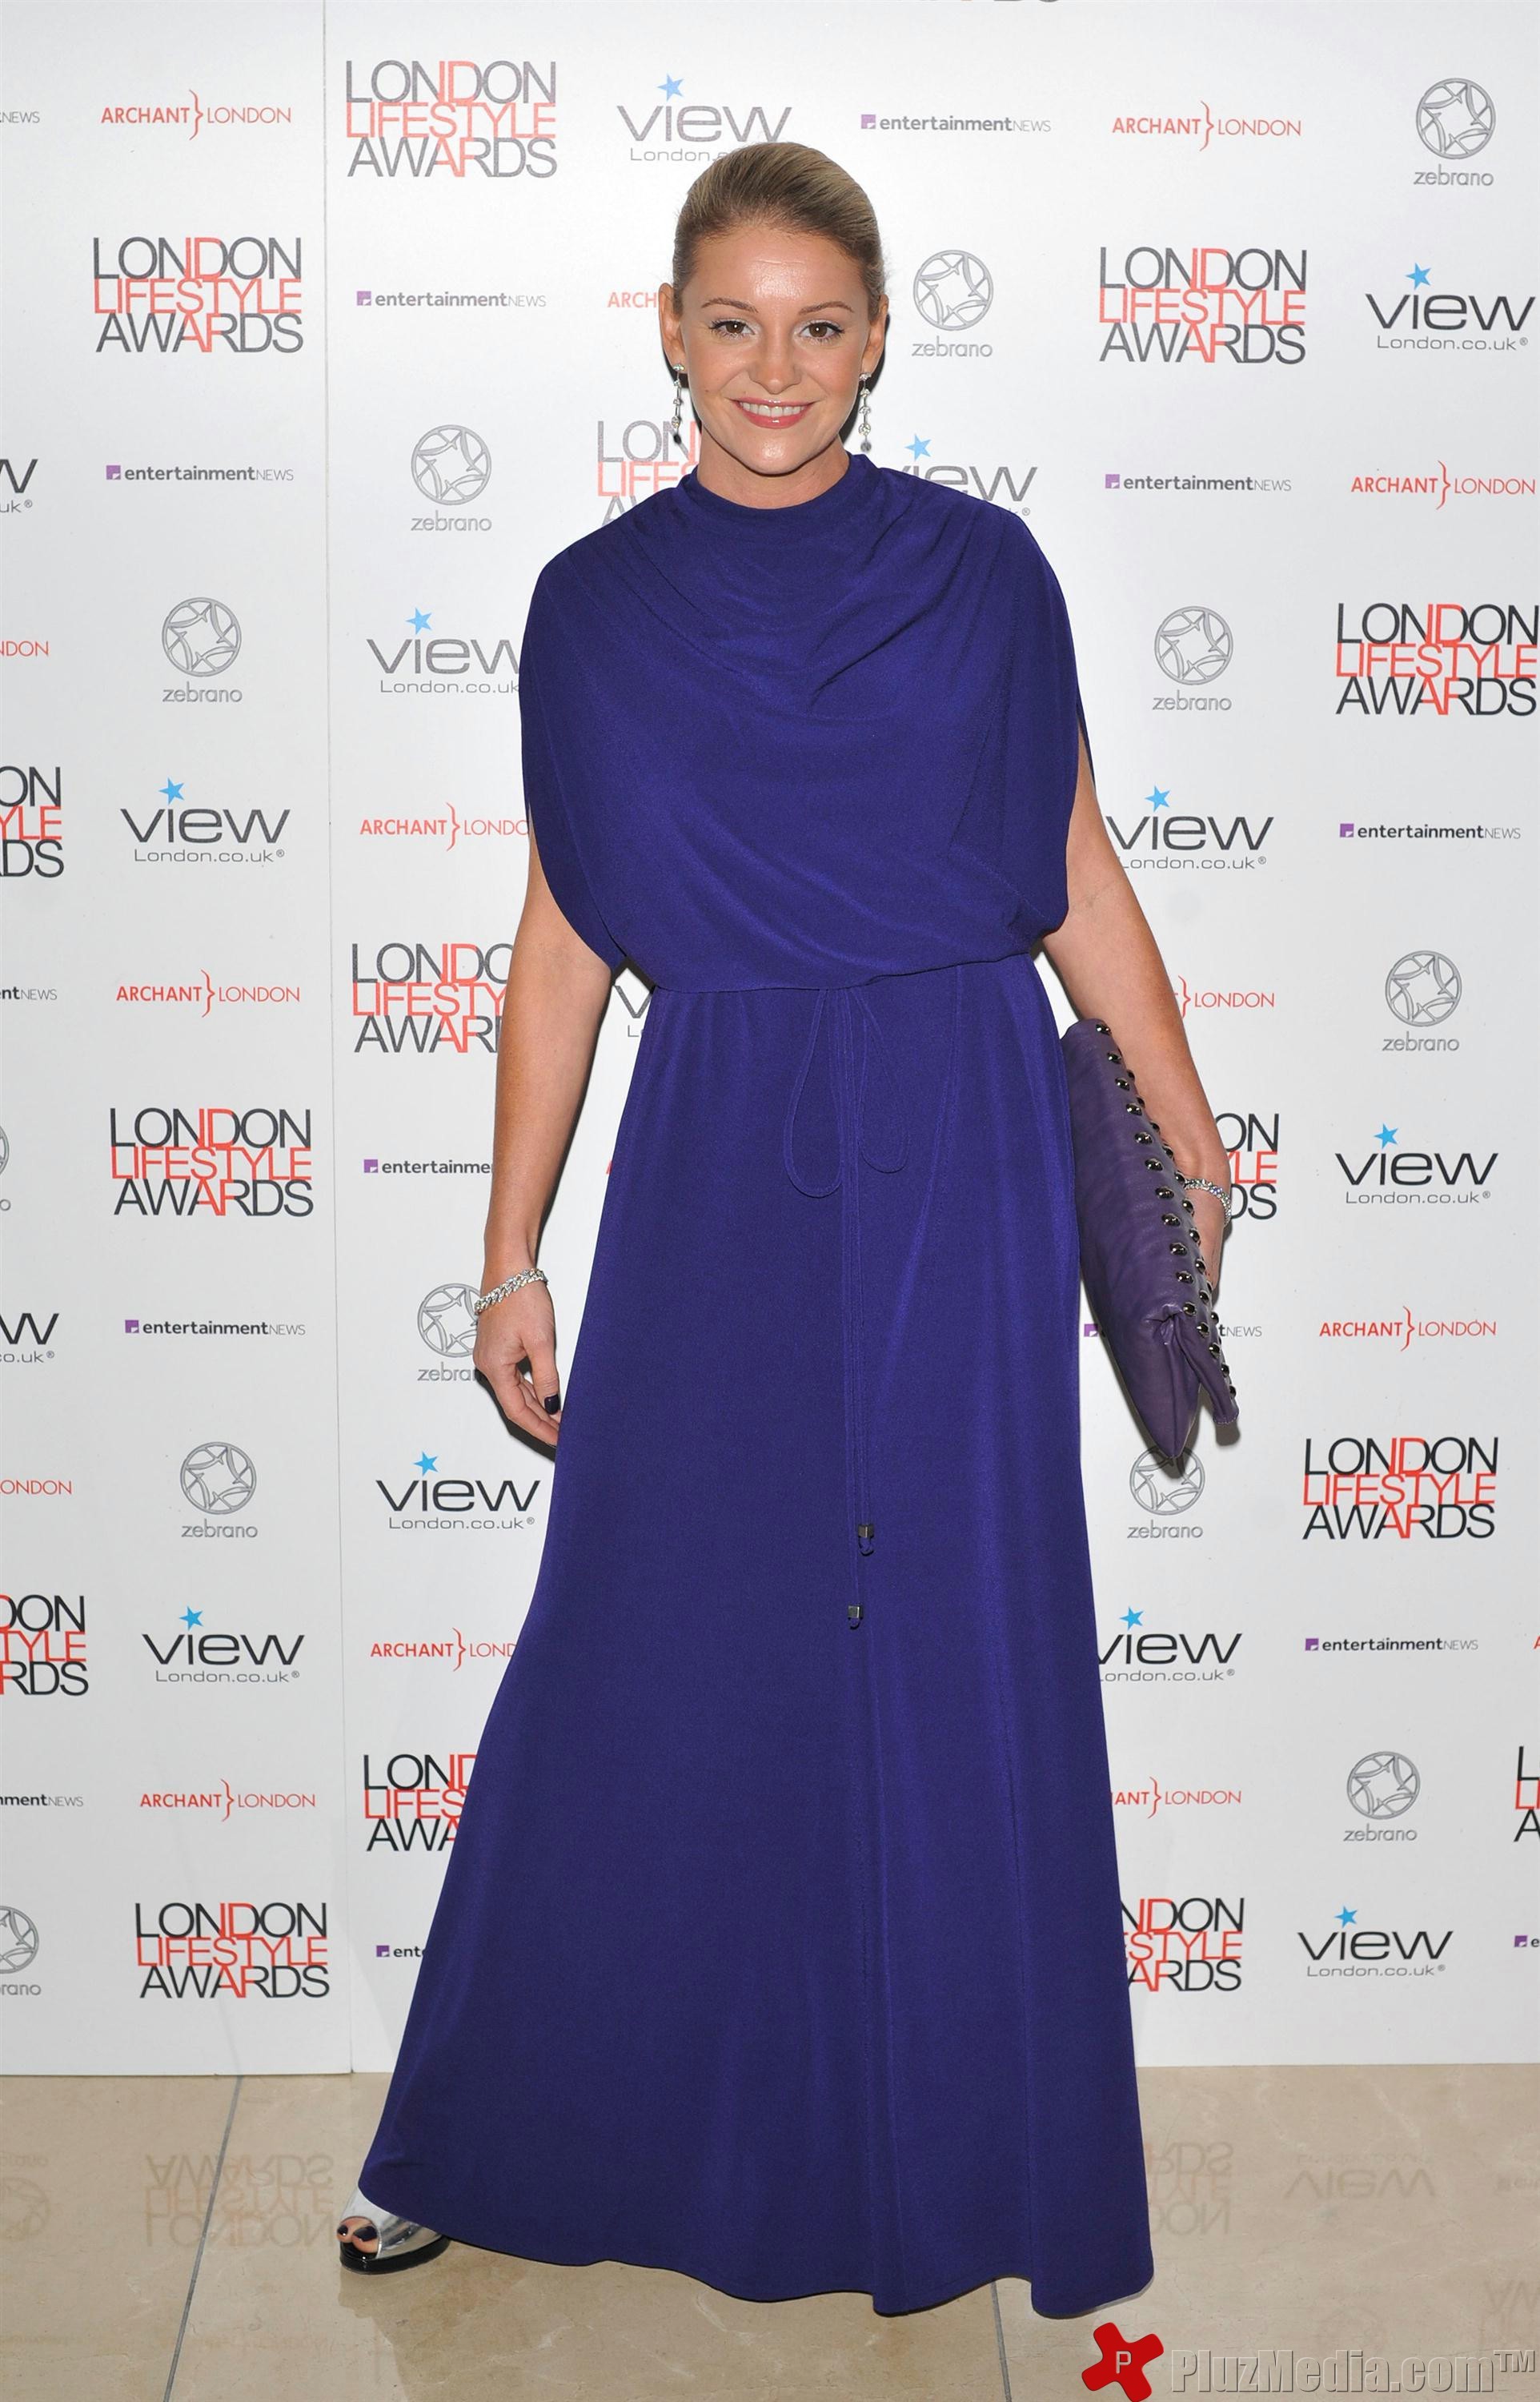 London Lifestyle Awards at the Park Plaza Riverbank - Arrivals - Photos | Picture 96691